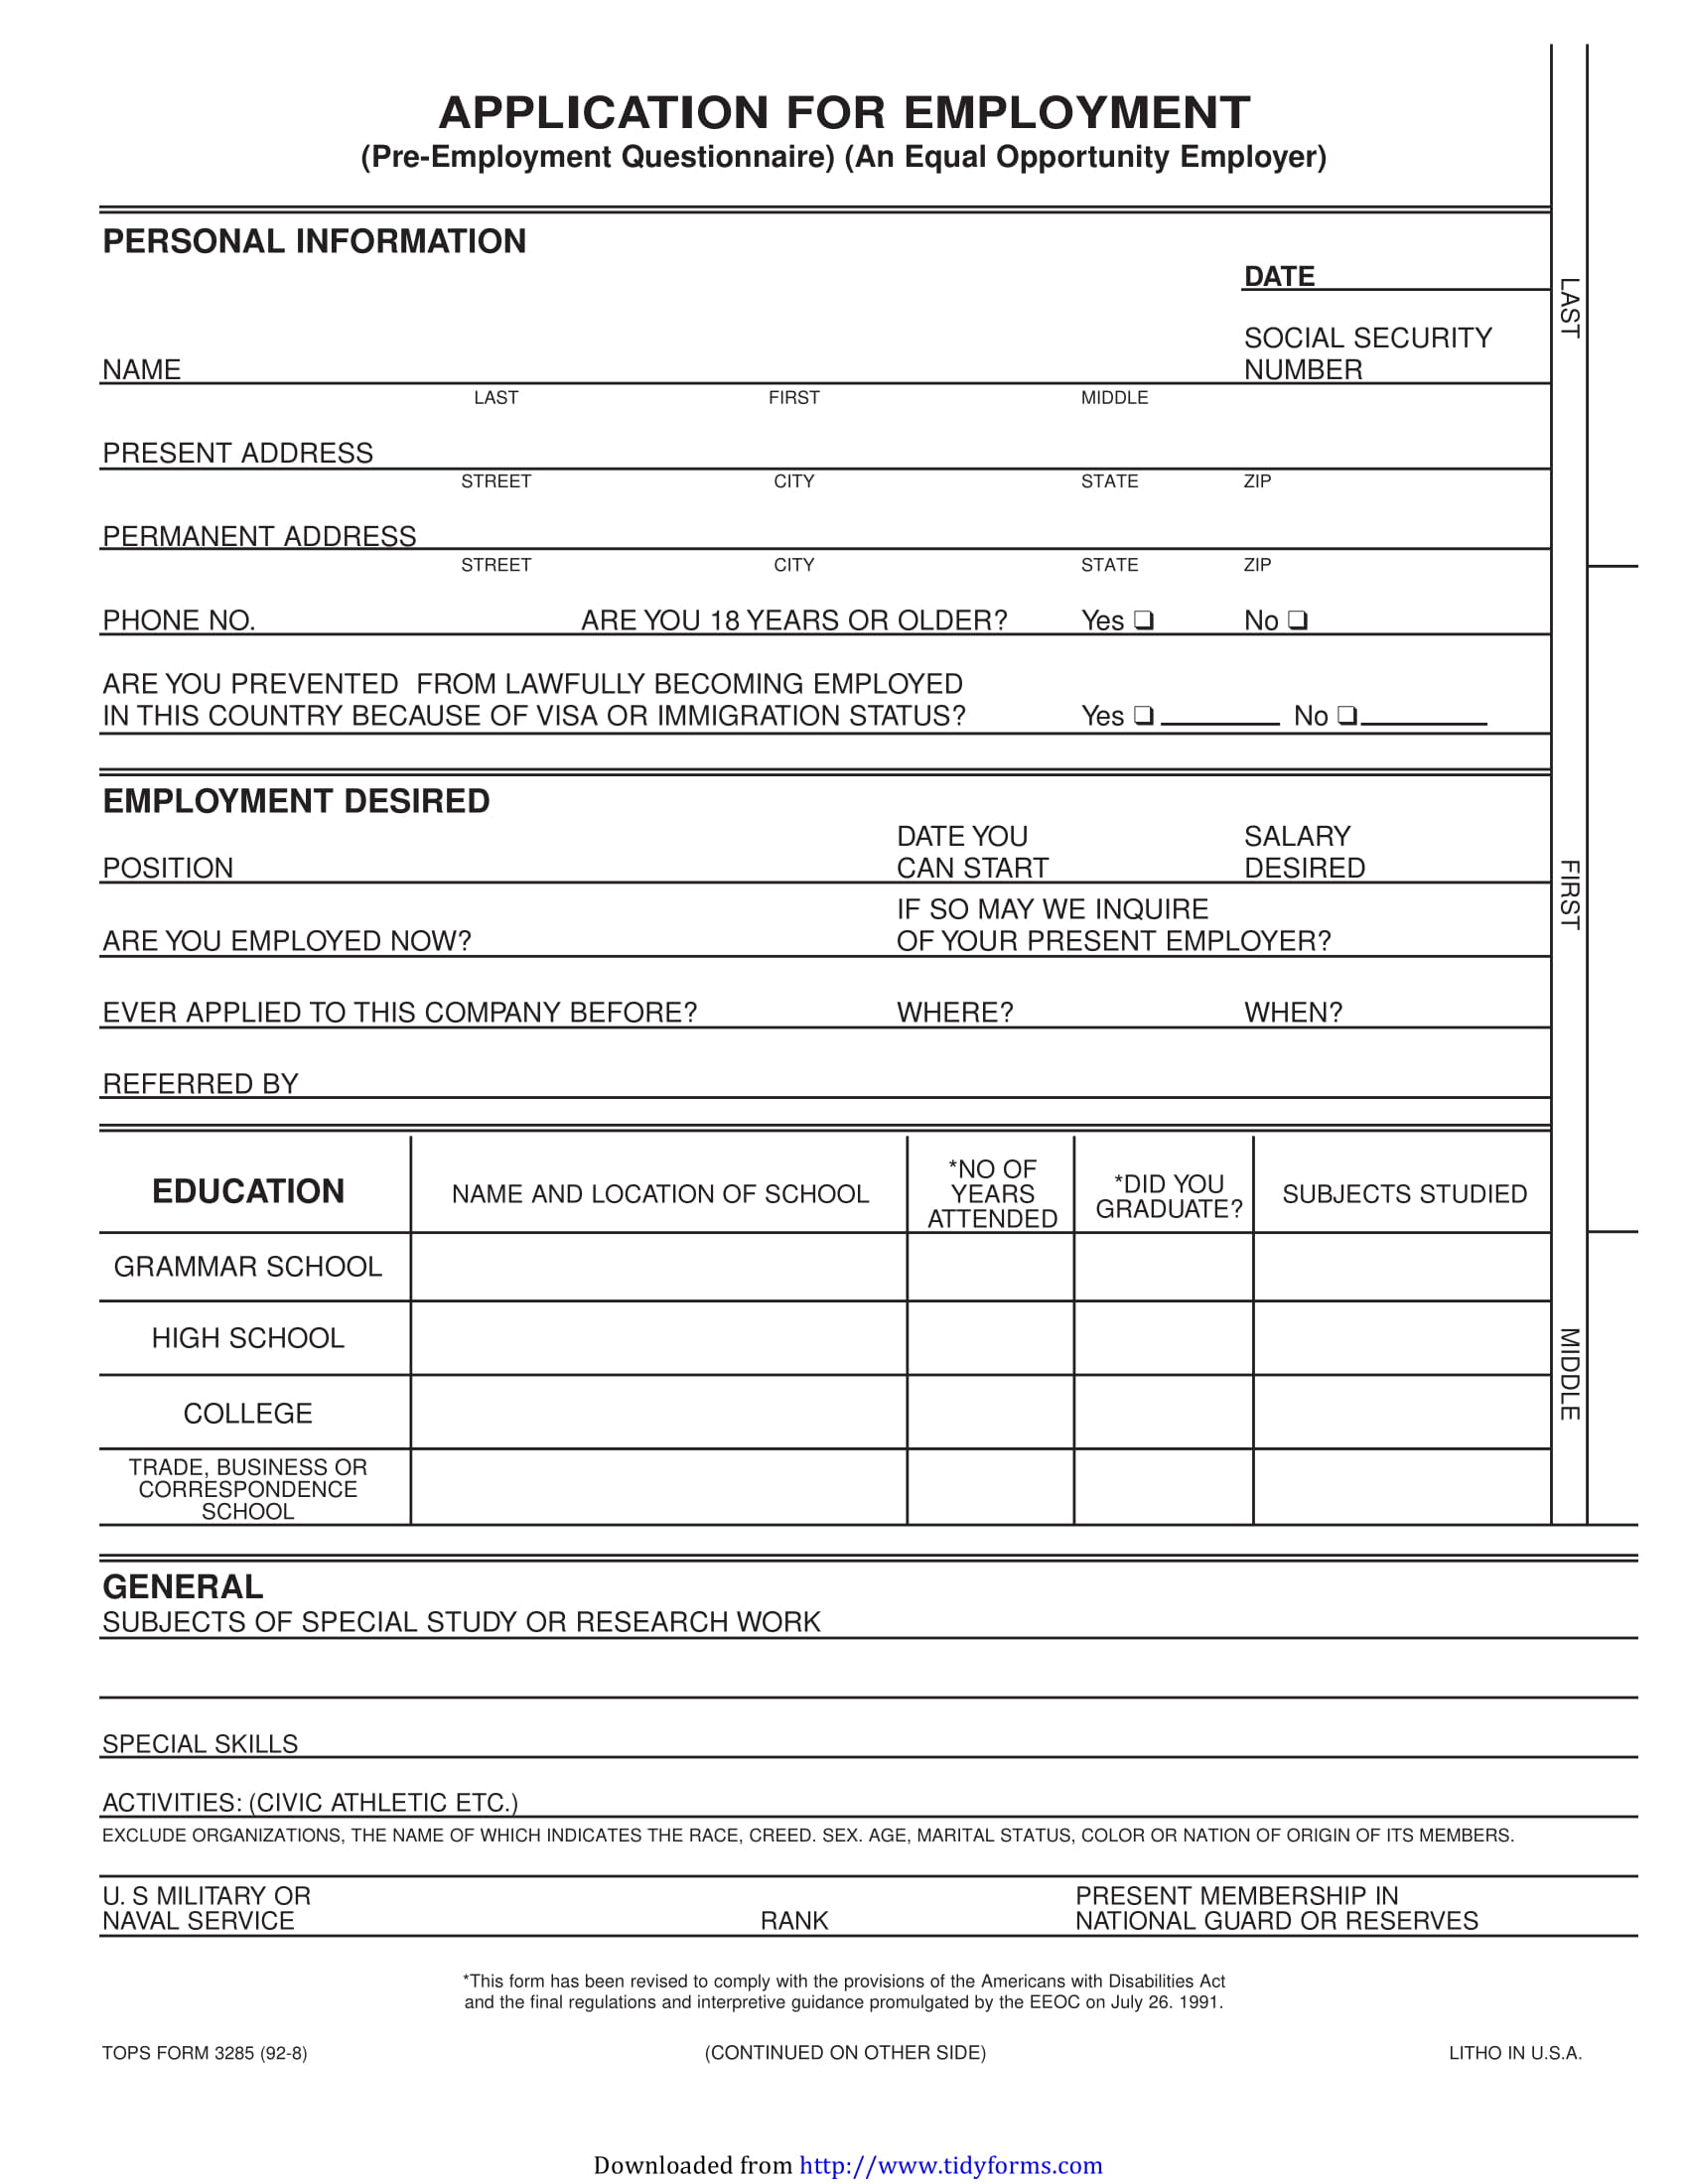 How To Fill Employment Pass Application Form Singapore Darrin Kenney 